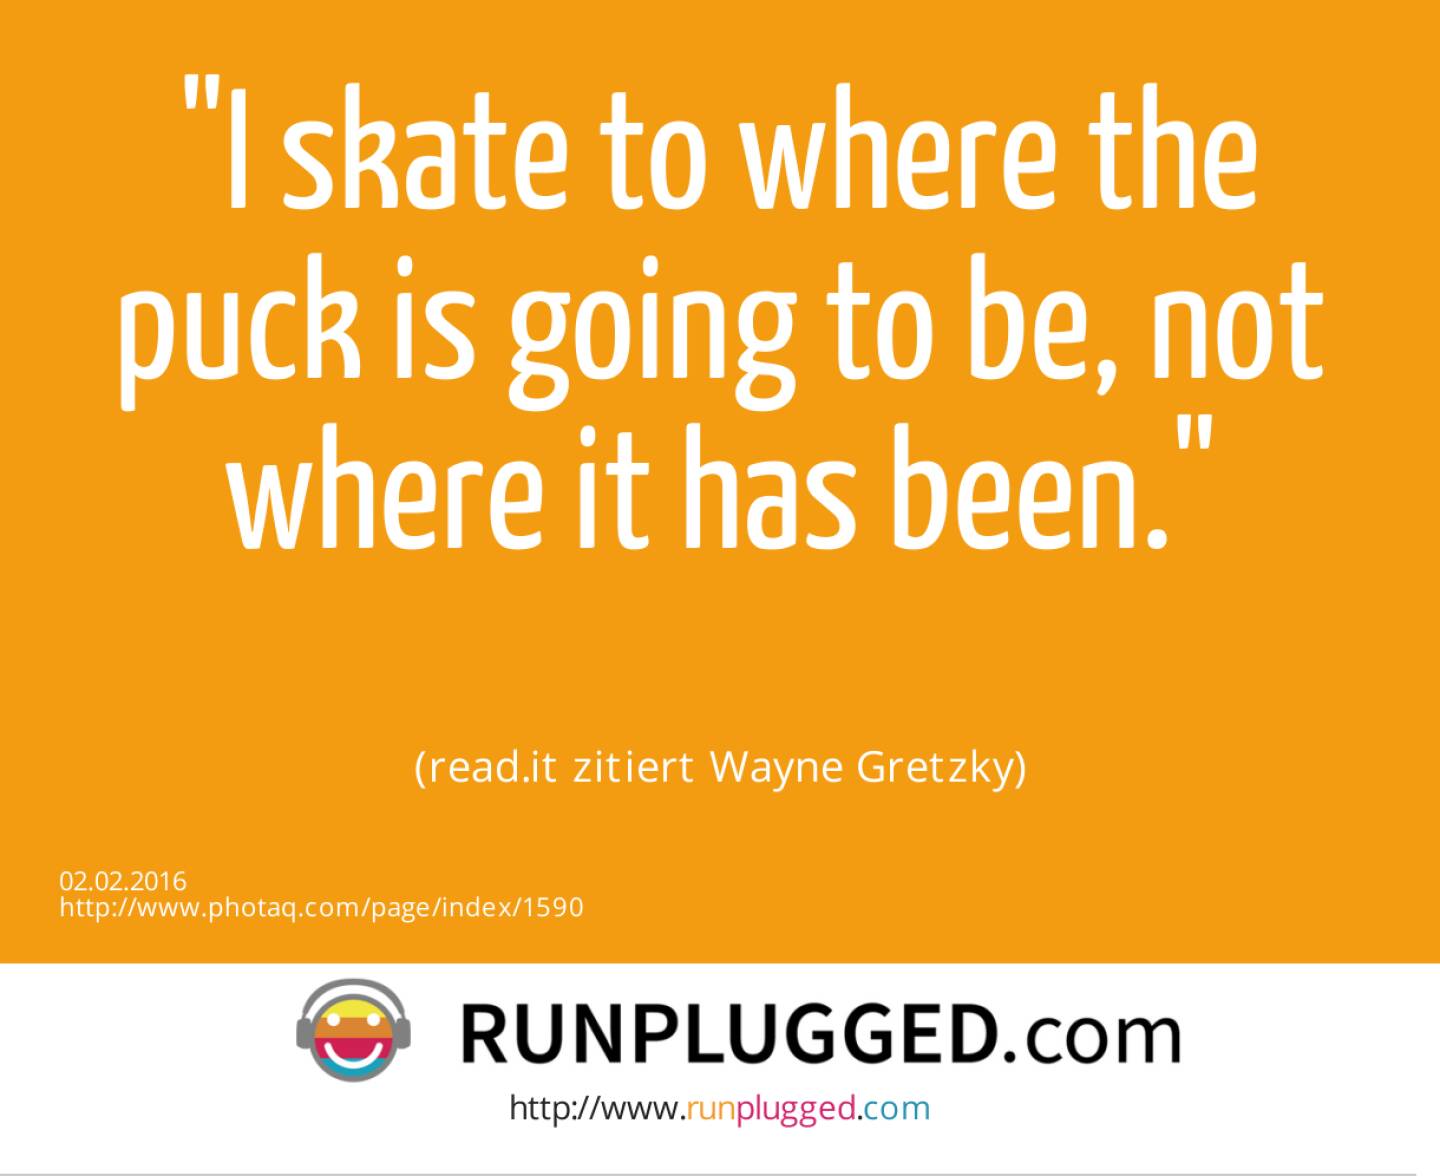 I skate to where the puck is going to be, not where it has been.<br><br> (read.it zitiert Wayne Gretzky)